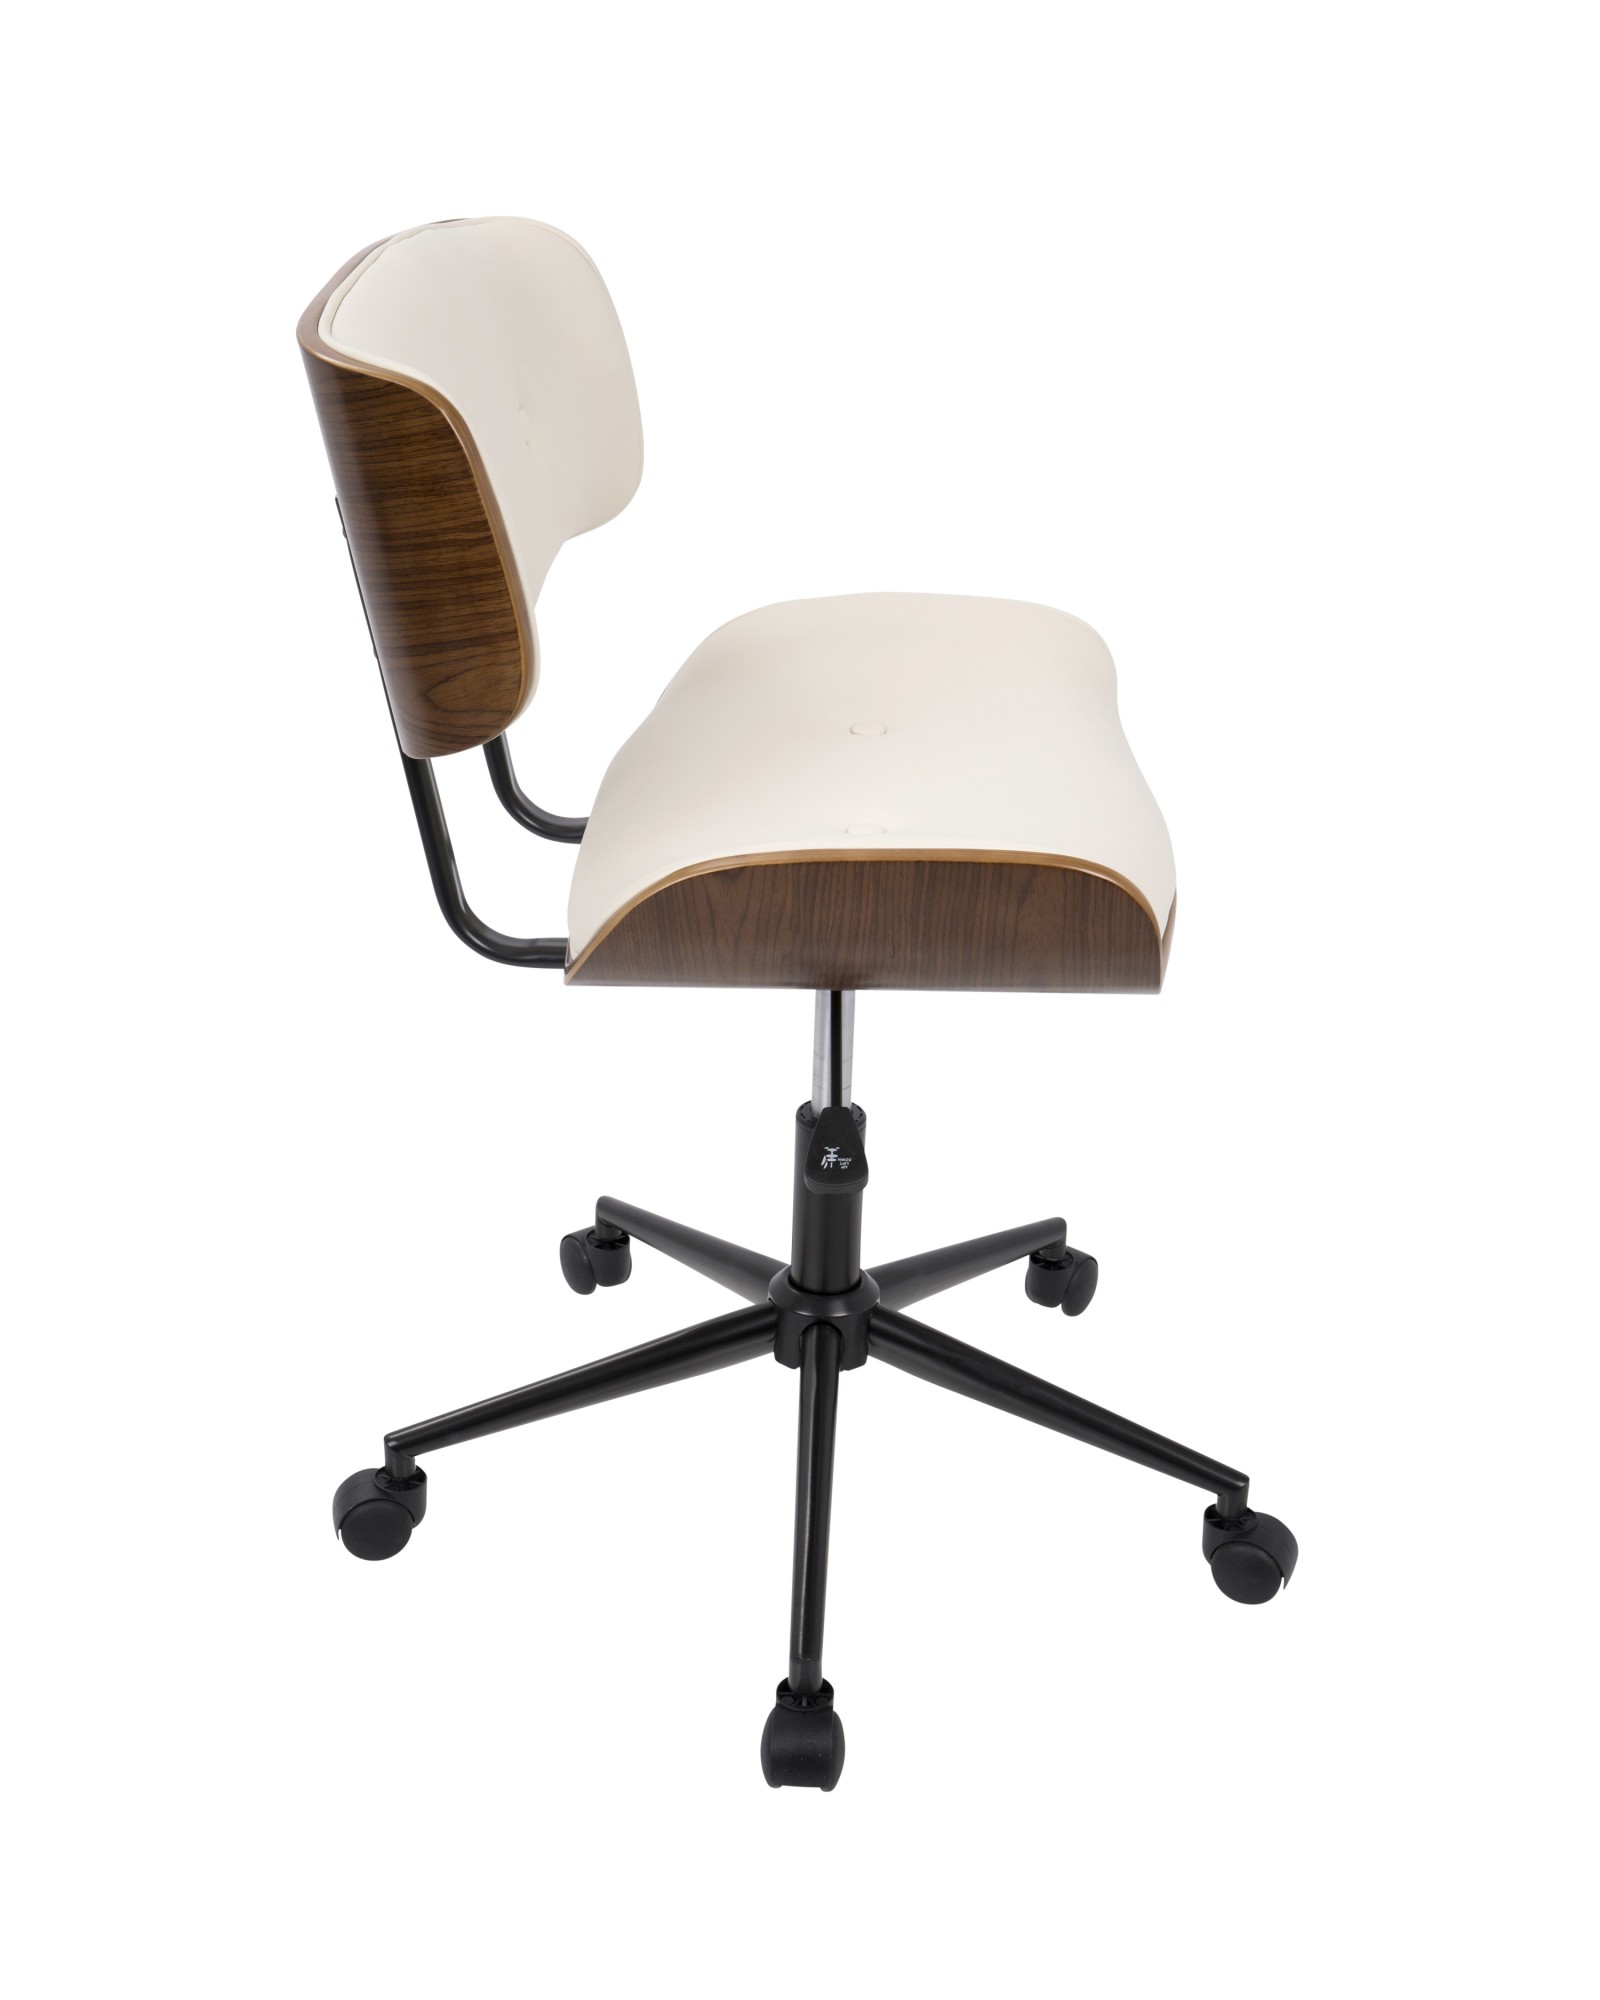 Lombardi Mid-Century Modern Adjustable Office Chair with Swivel in Walnut and Cream